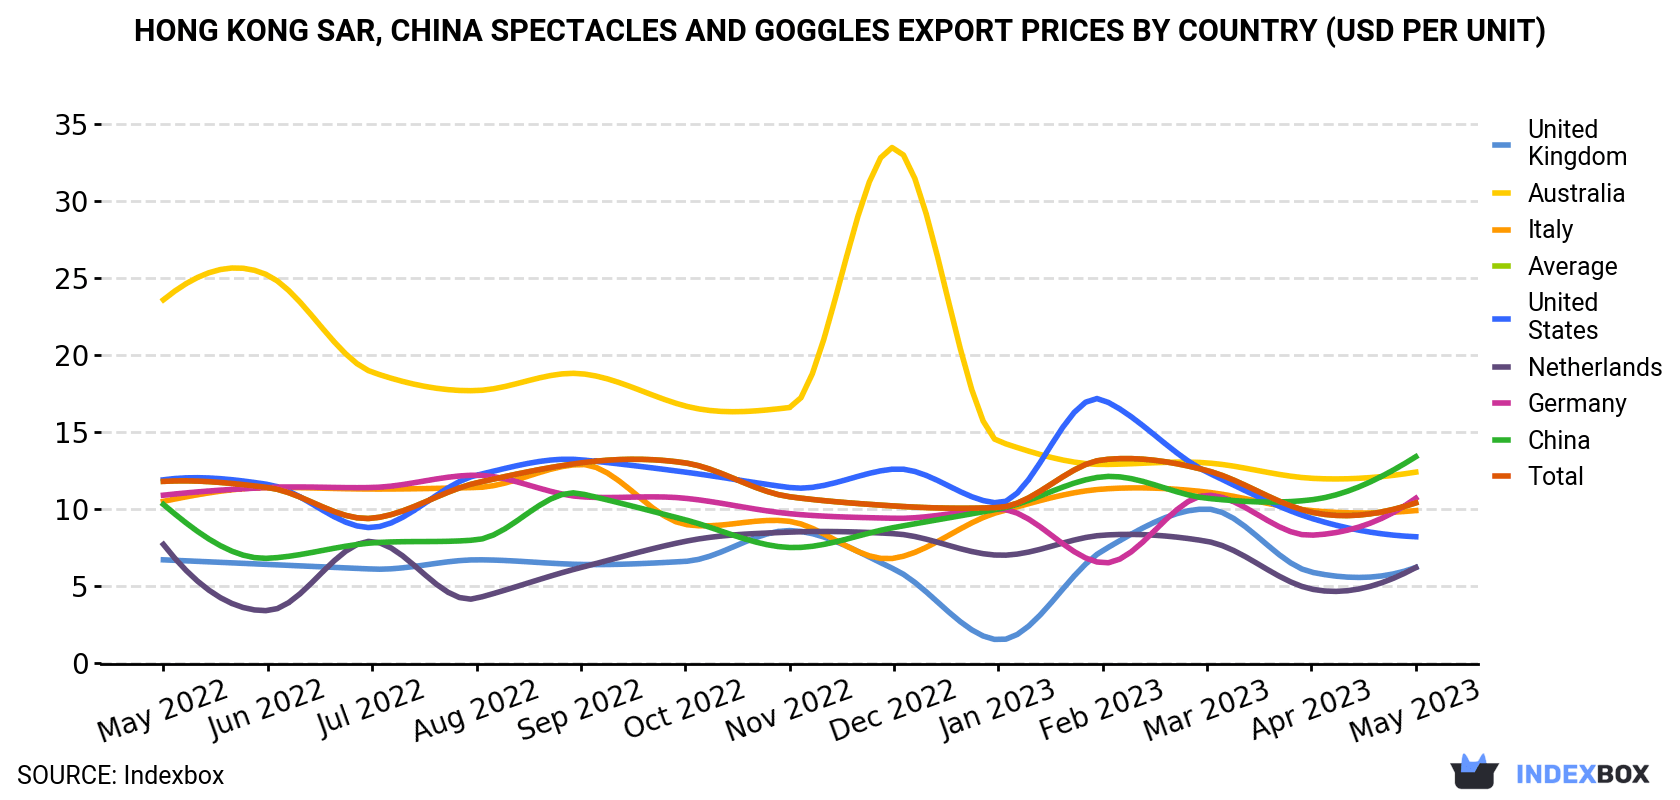 Hong Kong Spectacles And Goggles Export Prices By Country (USD Per Unit)